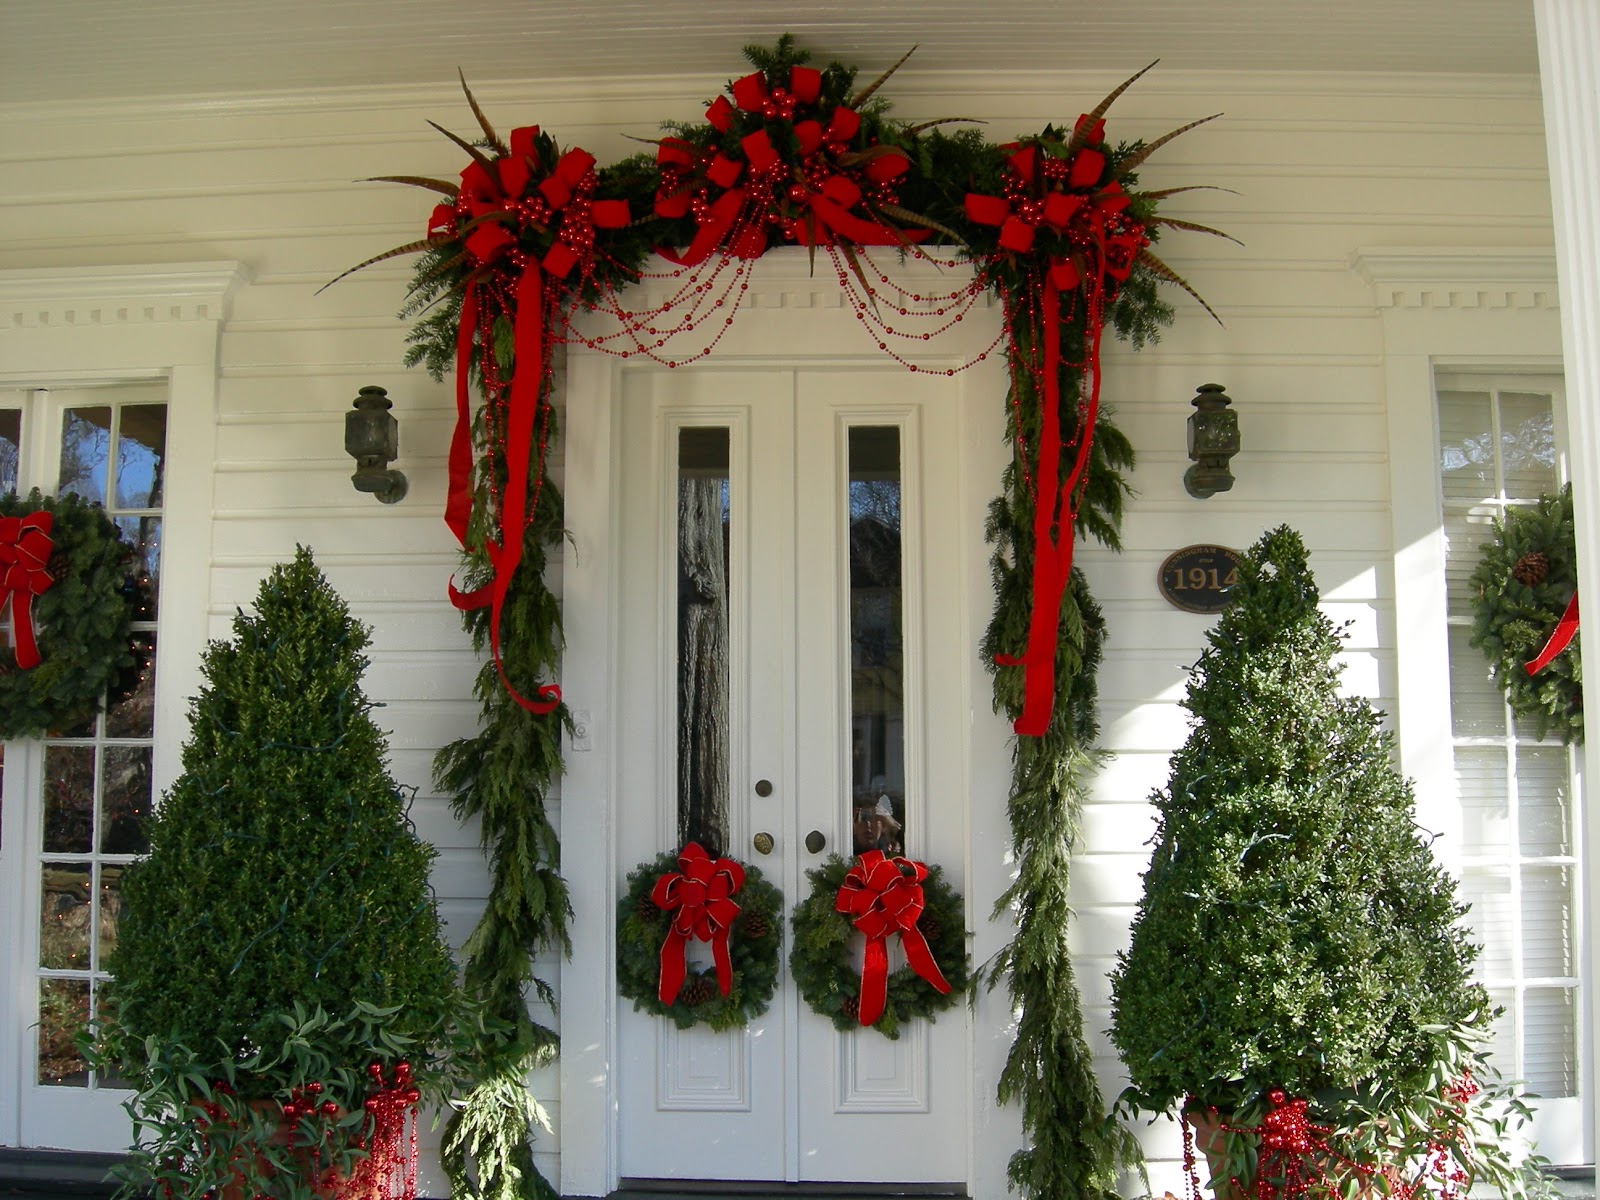 Christmas decorations around a door on a white house